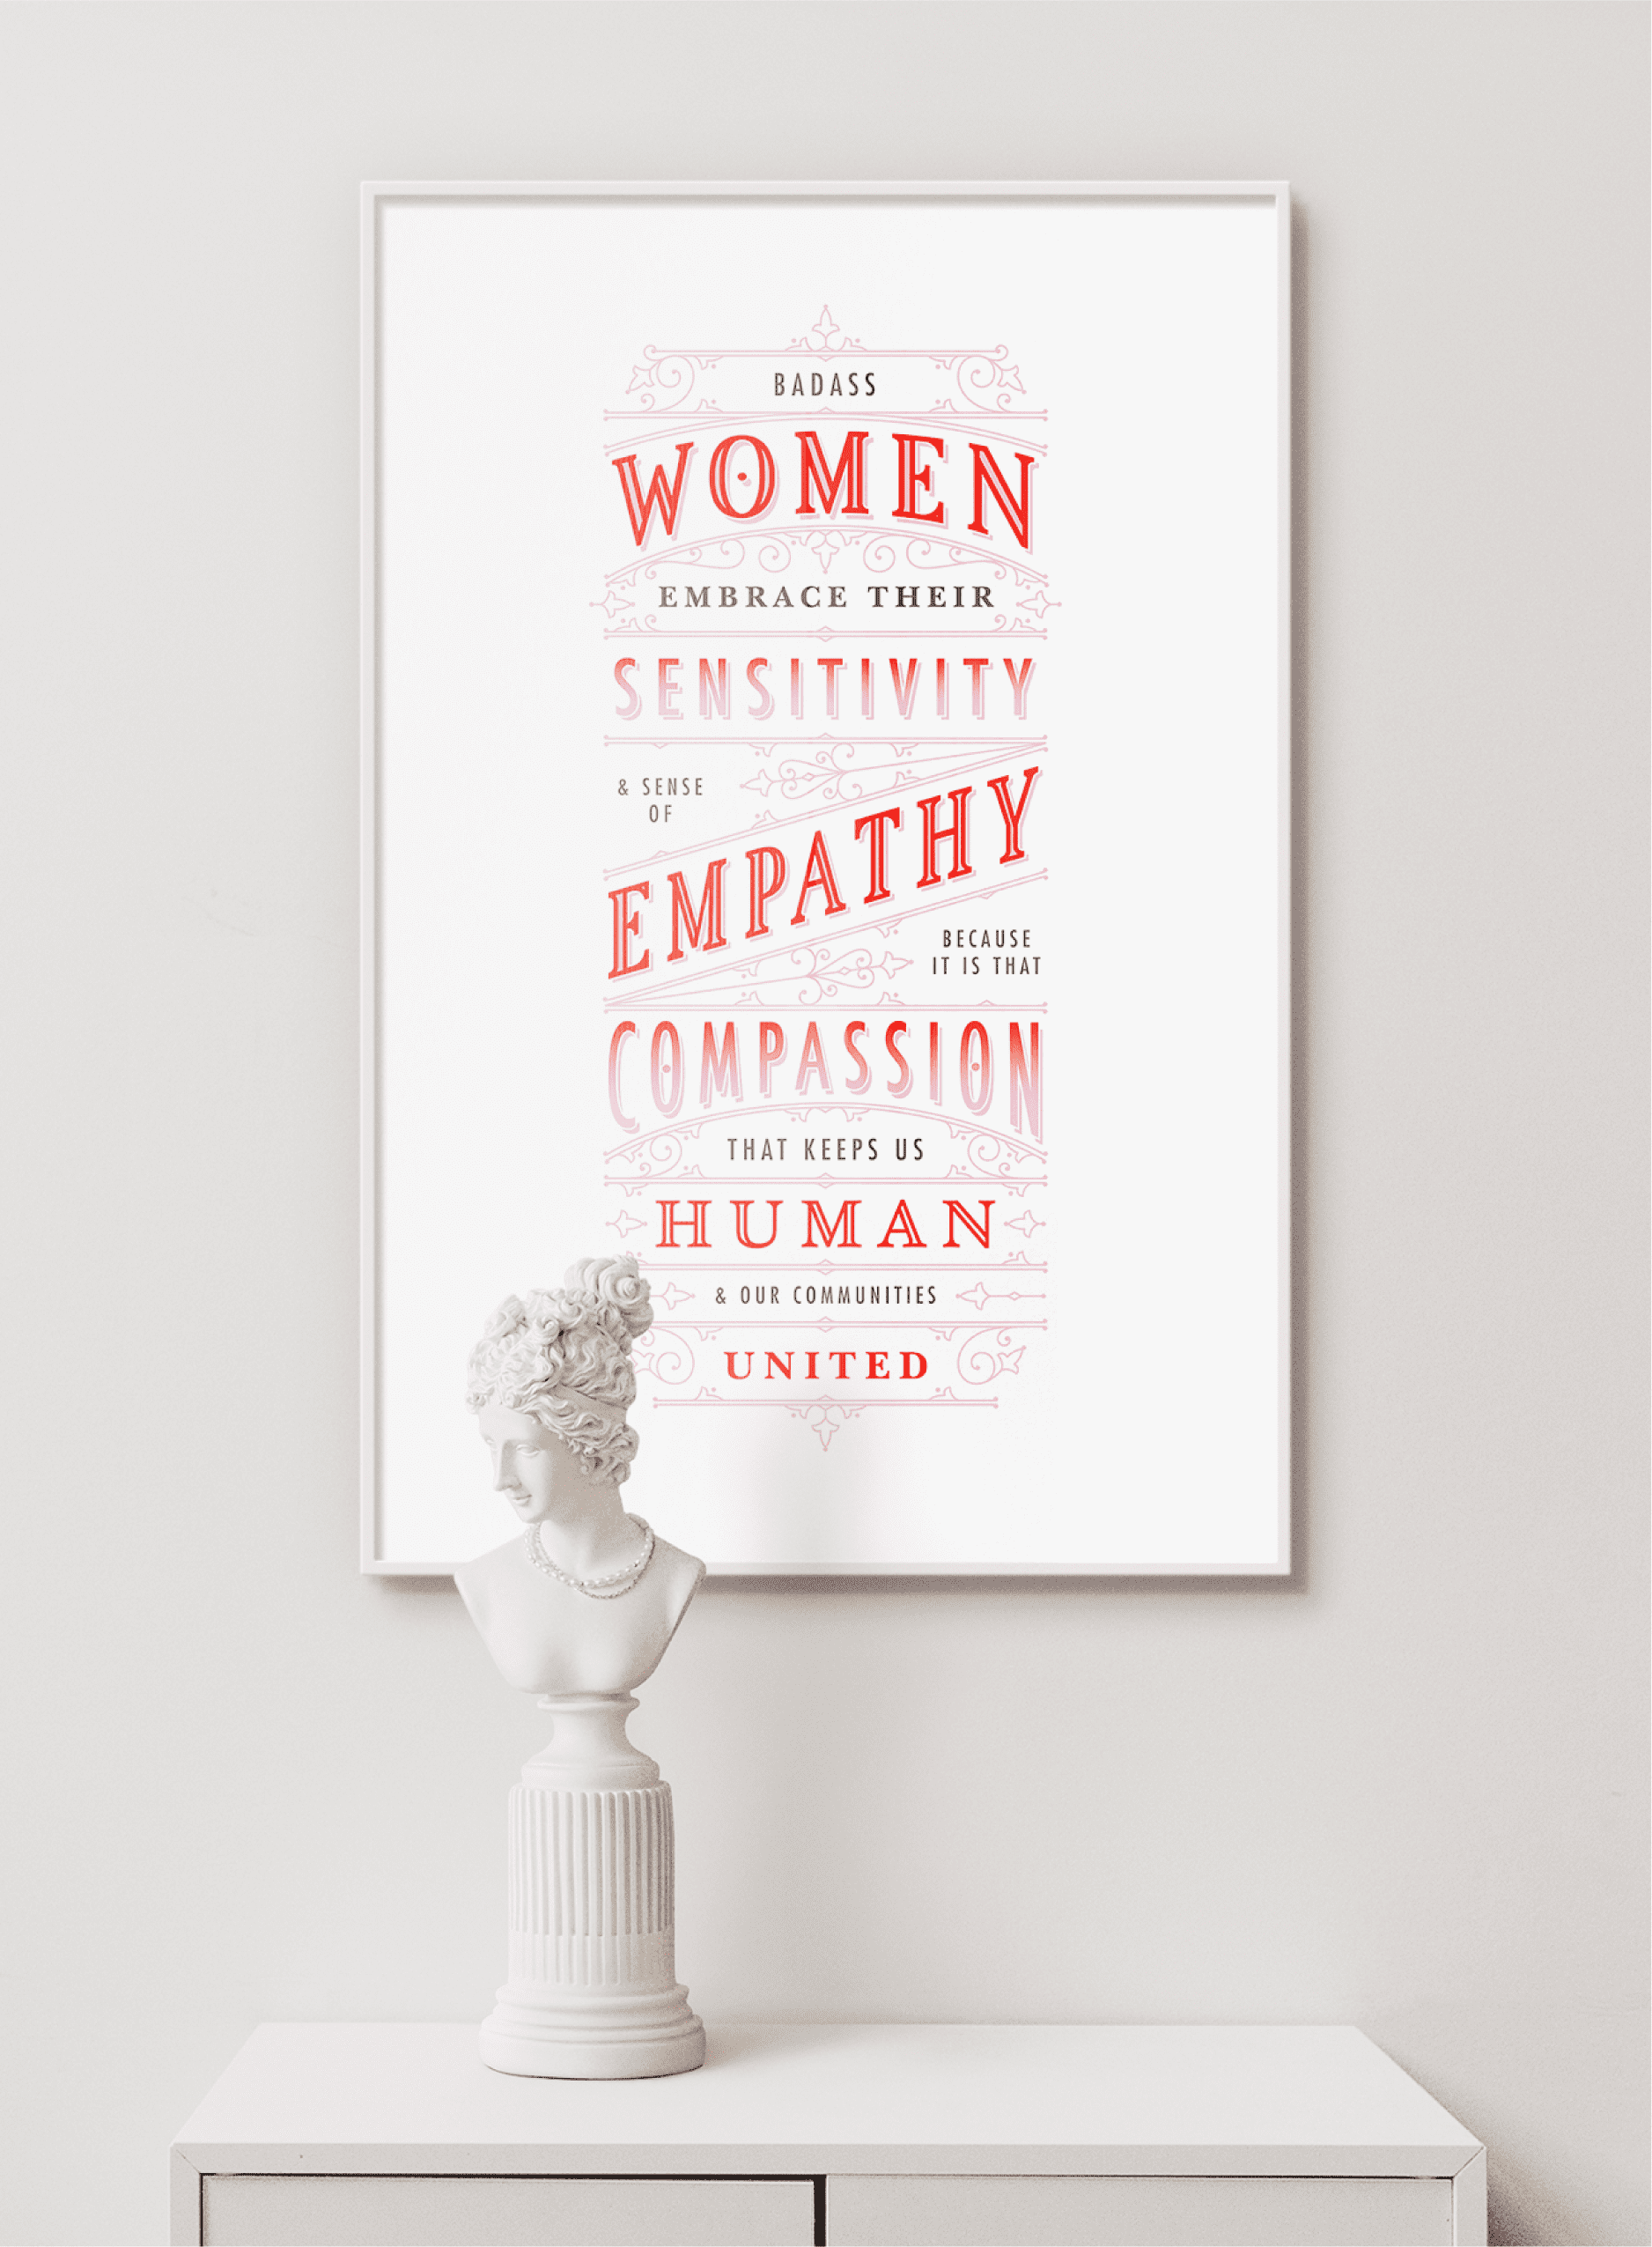 quote art print that says badass women embrace their sensitivity and sense of empathy because it is that compassion that keeps us human and our communities united